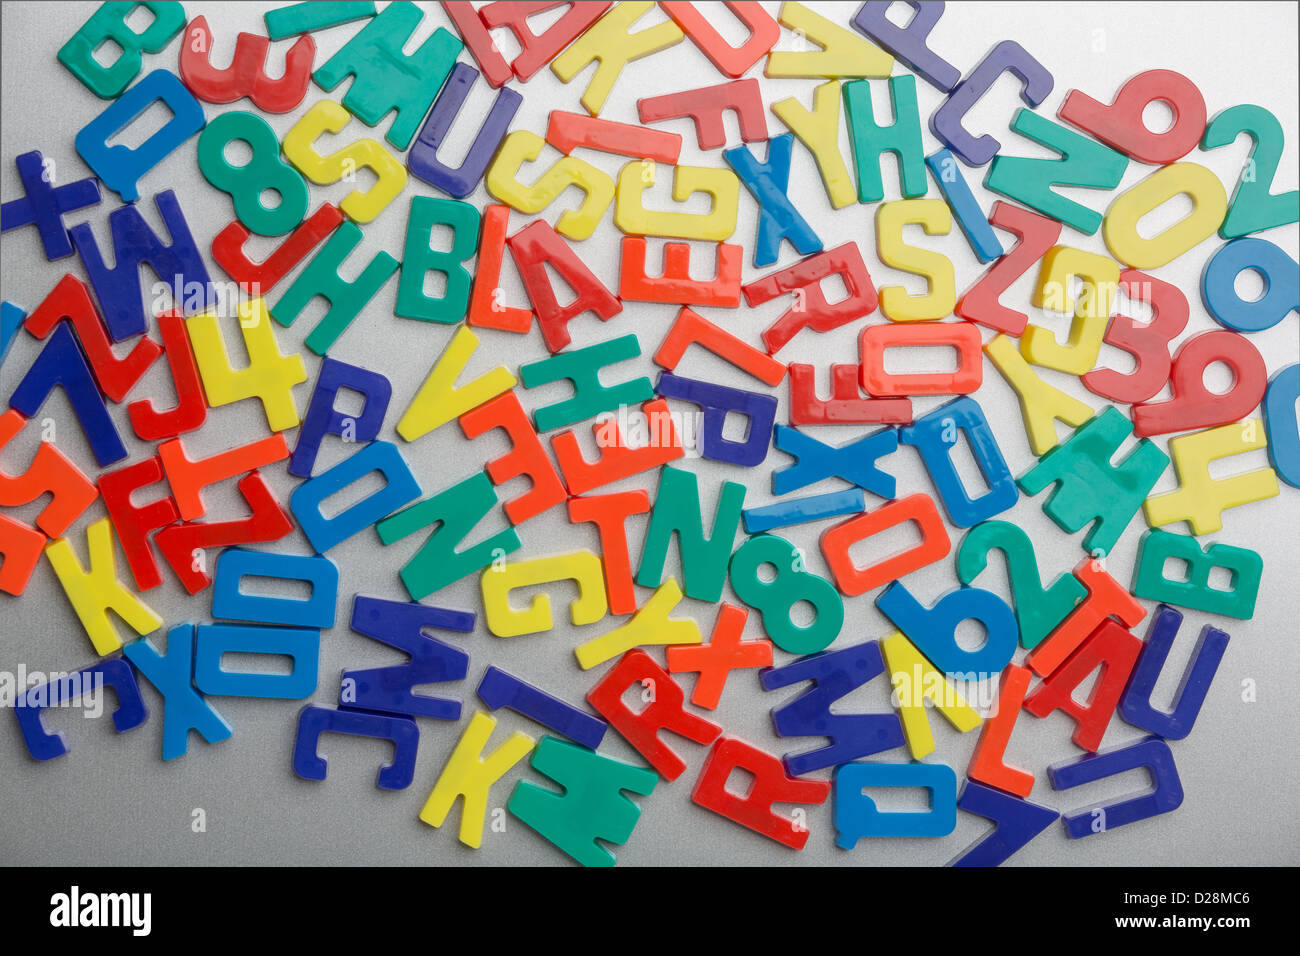 Refrigerator magnet letters jumbled up in a random pattern Stock Photo